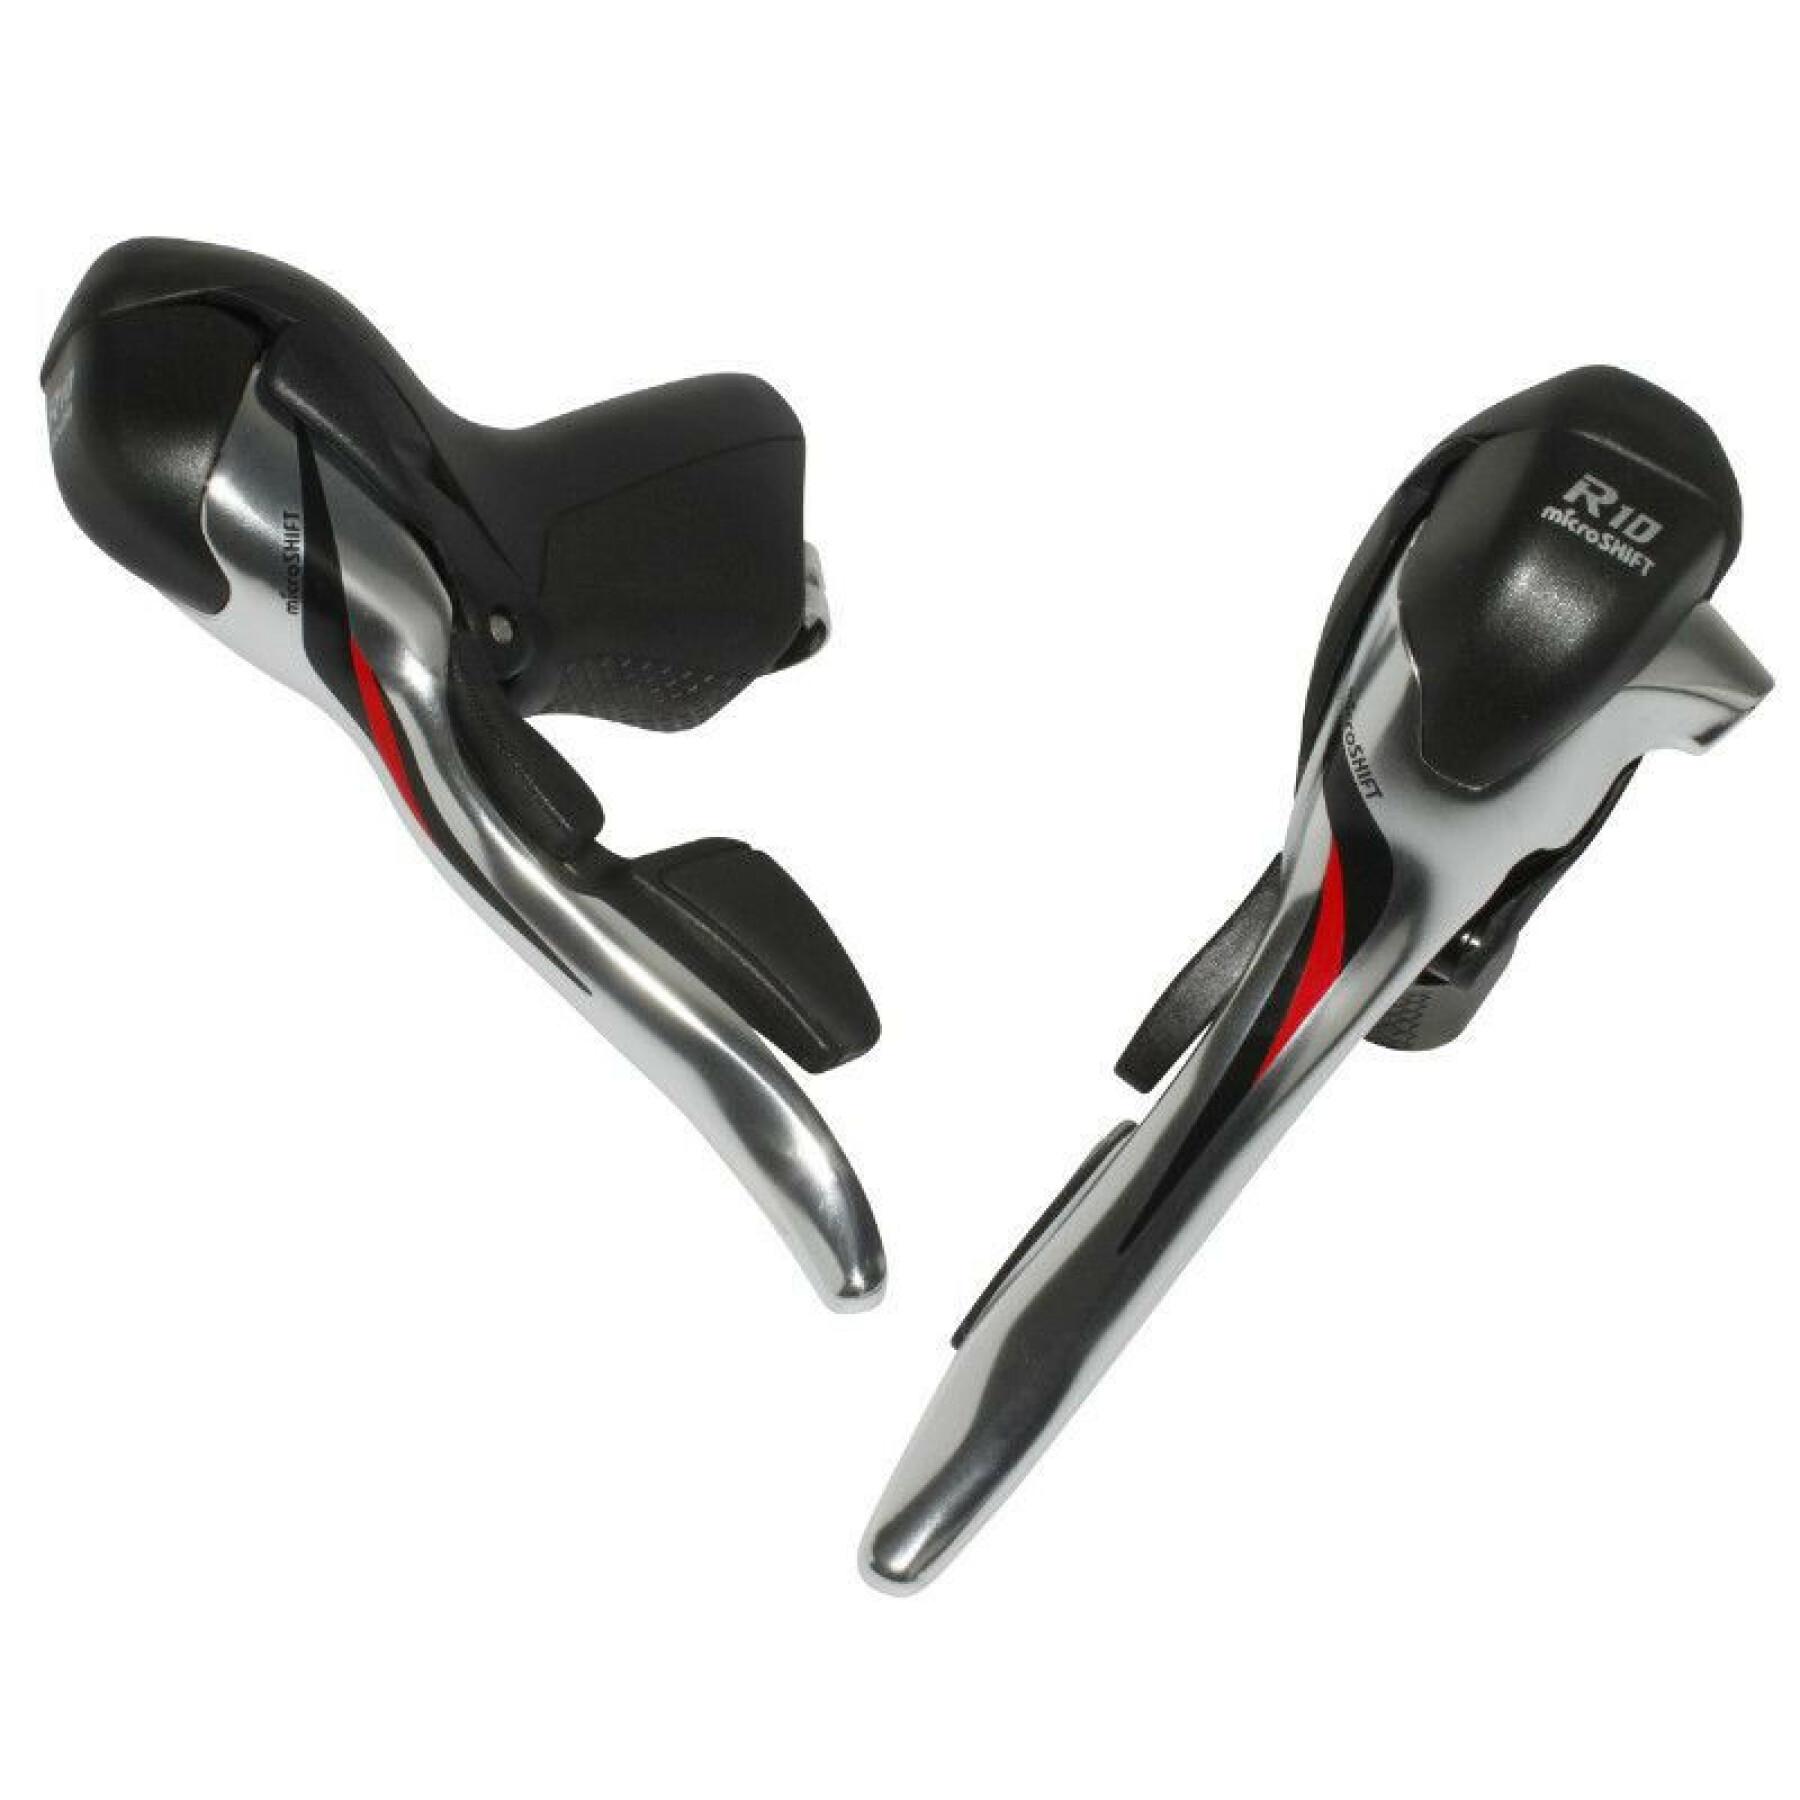 Pair of triple aluminum road shifters compatible with shimano except tiagra 4700 Microshift